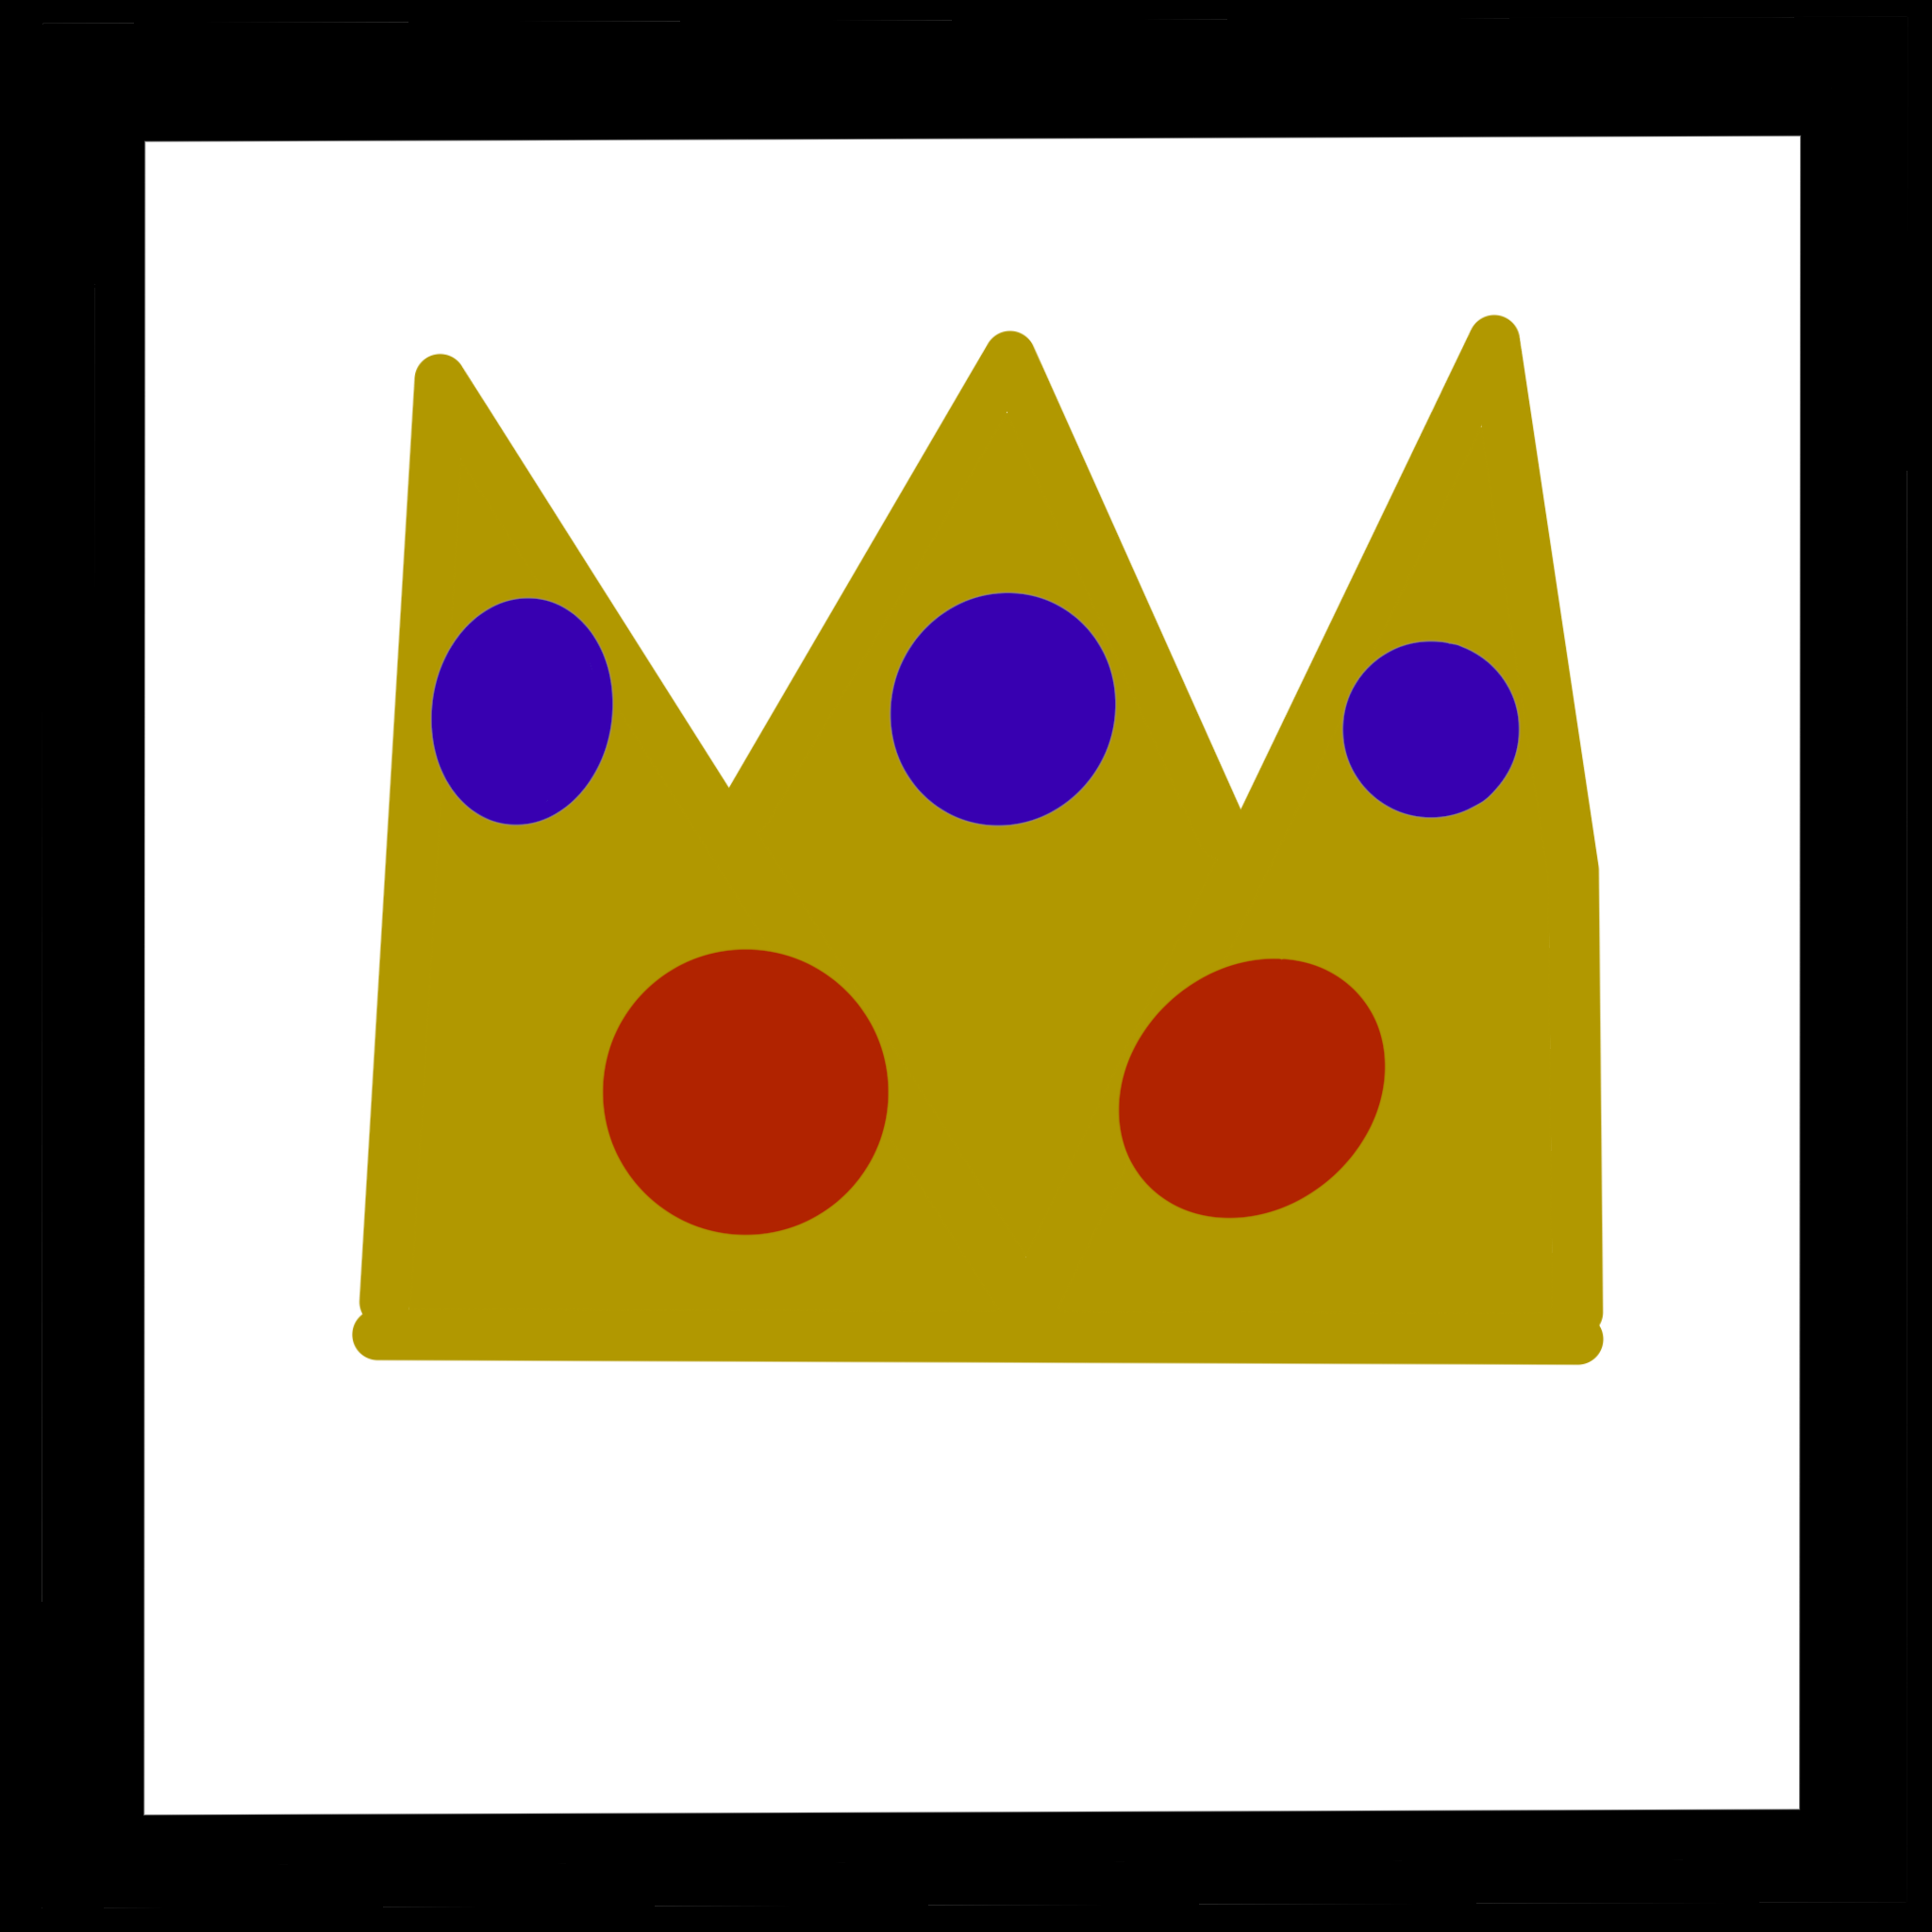  a black square with a drawing of a crown in the center. The crow has three peaks each with a blue jewel on it and below the peaks are two red jewels